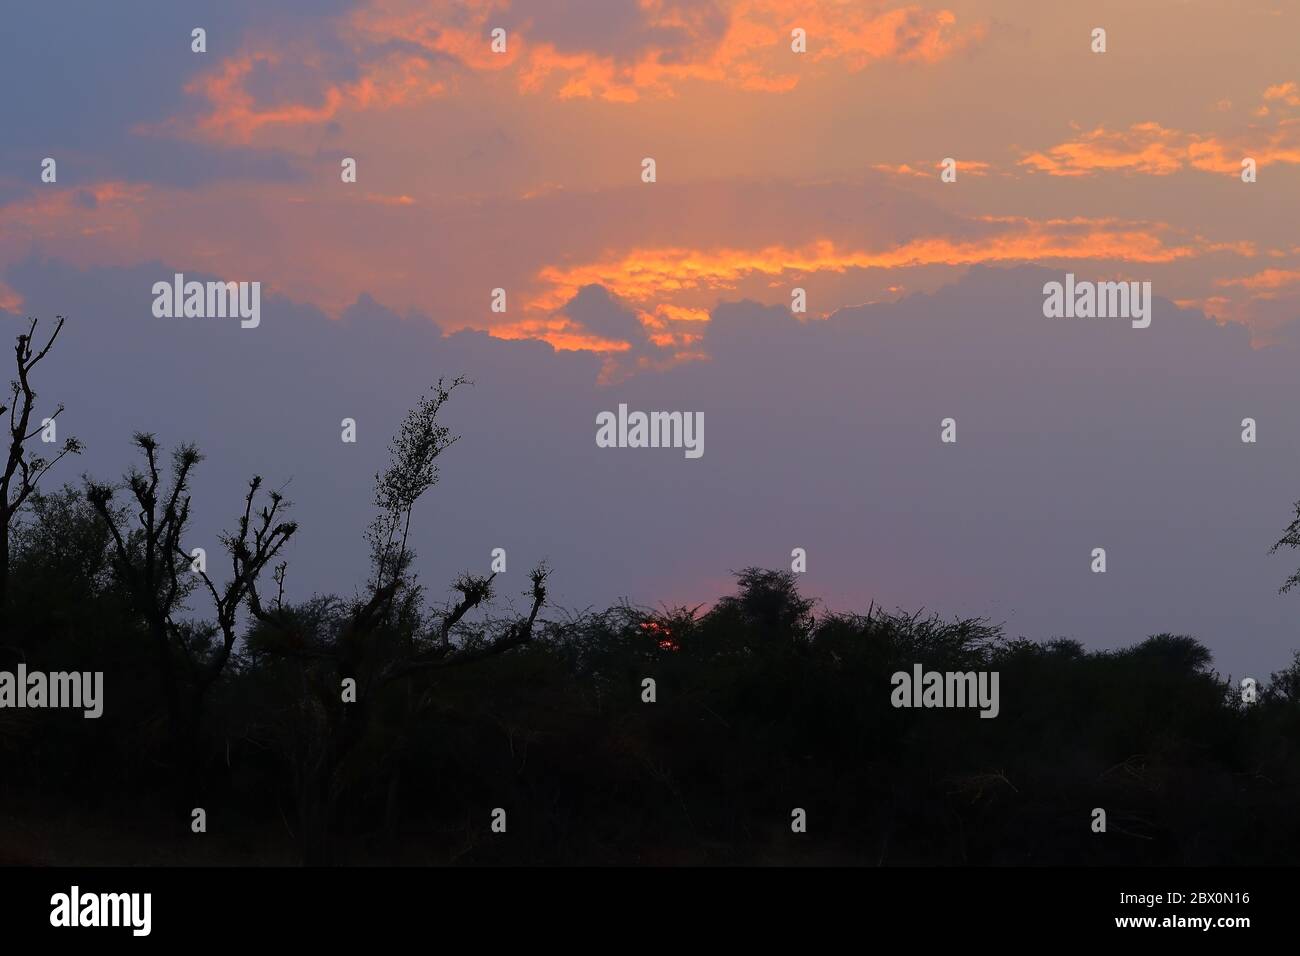 colourful domestic sky and clouds among sun sets behind silhouette forest trees in the monsoon season India Stock Photo